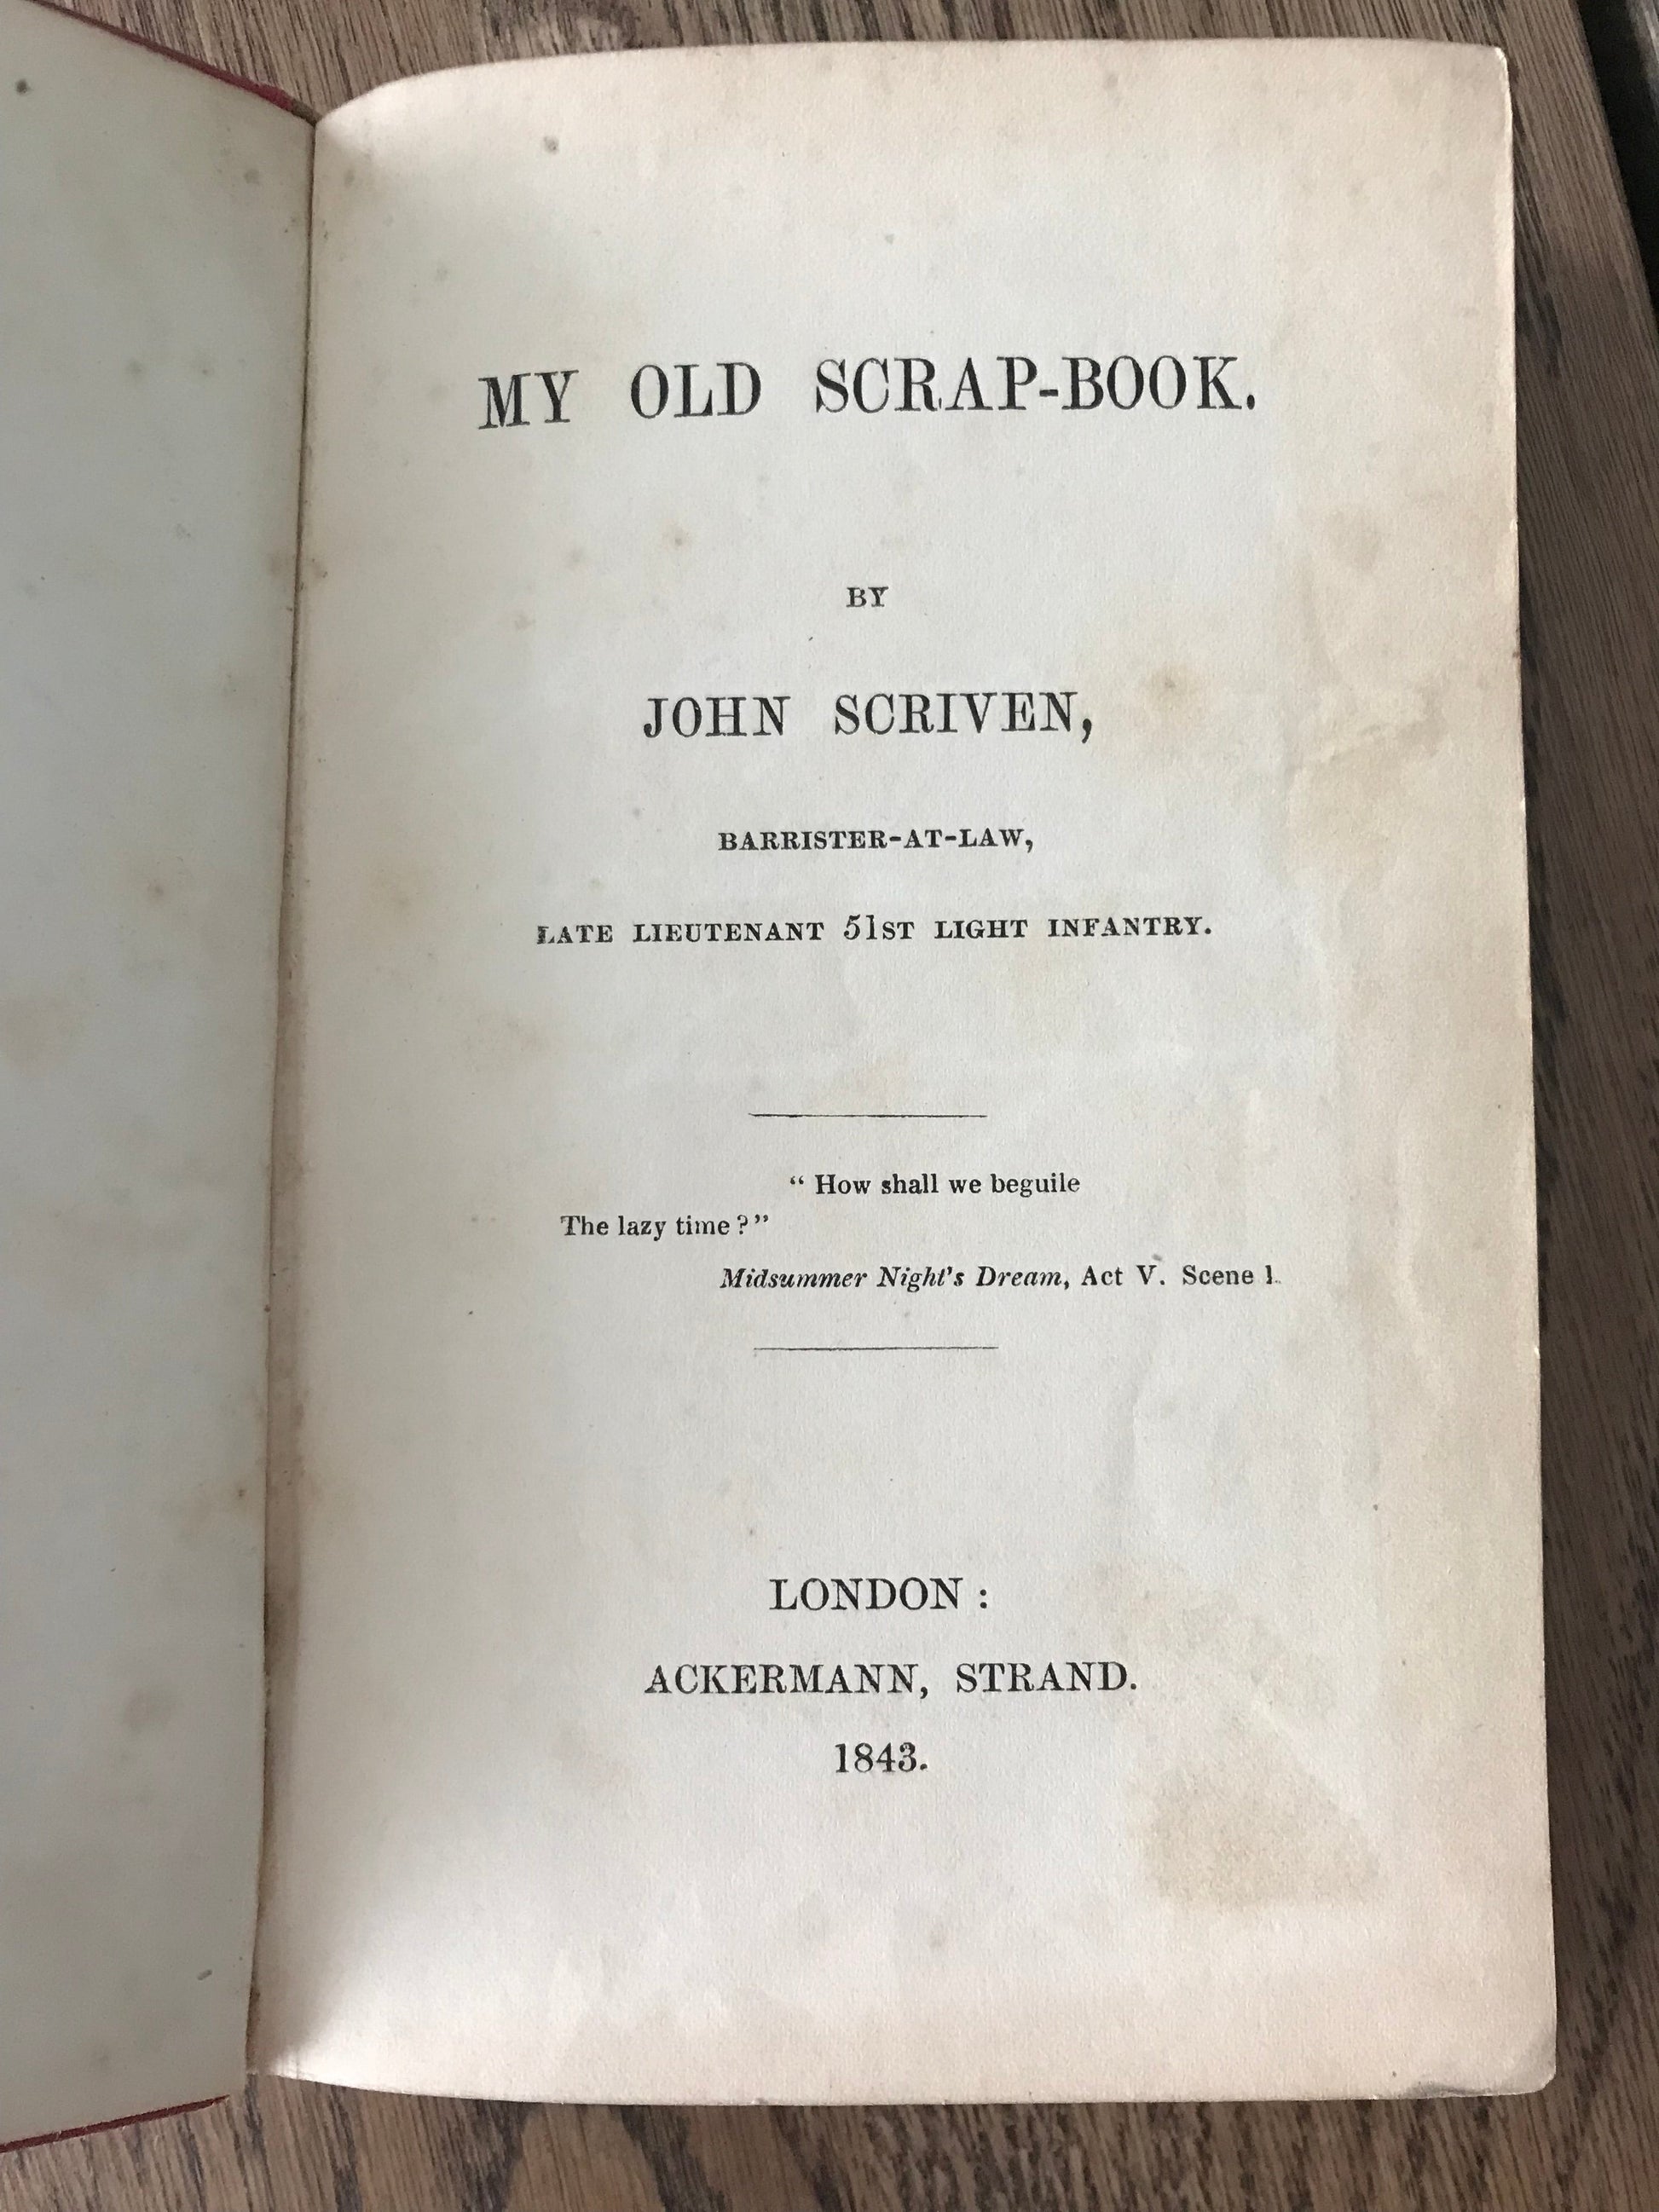 MY OLD SCRAP-BOOK  - BY JOHN SCRIVEN (POETRY) BooksCardsNBikes